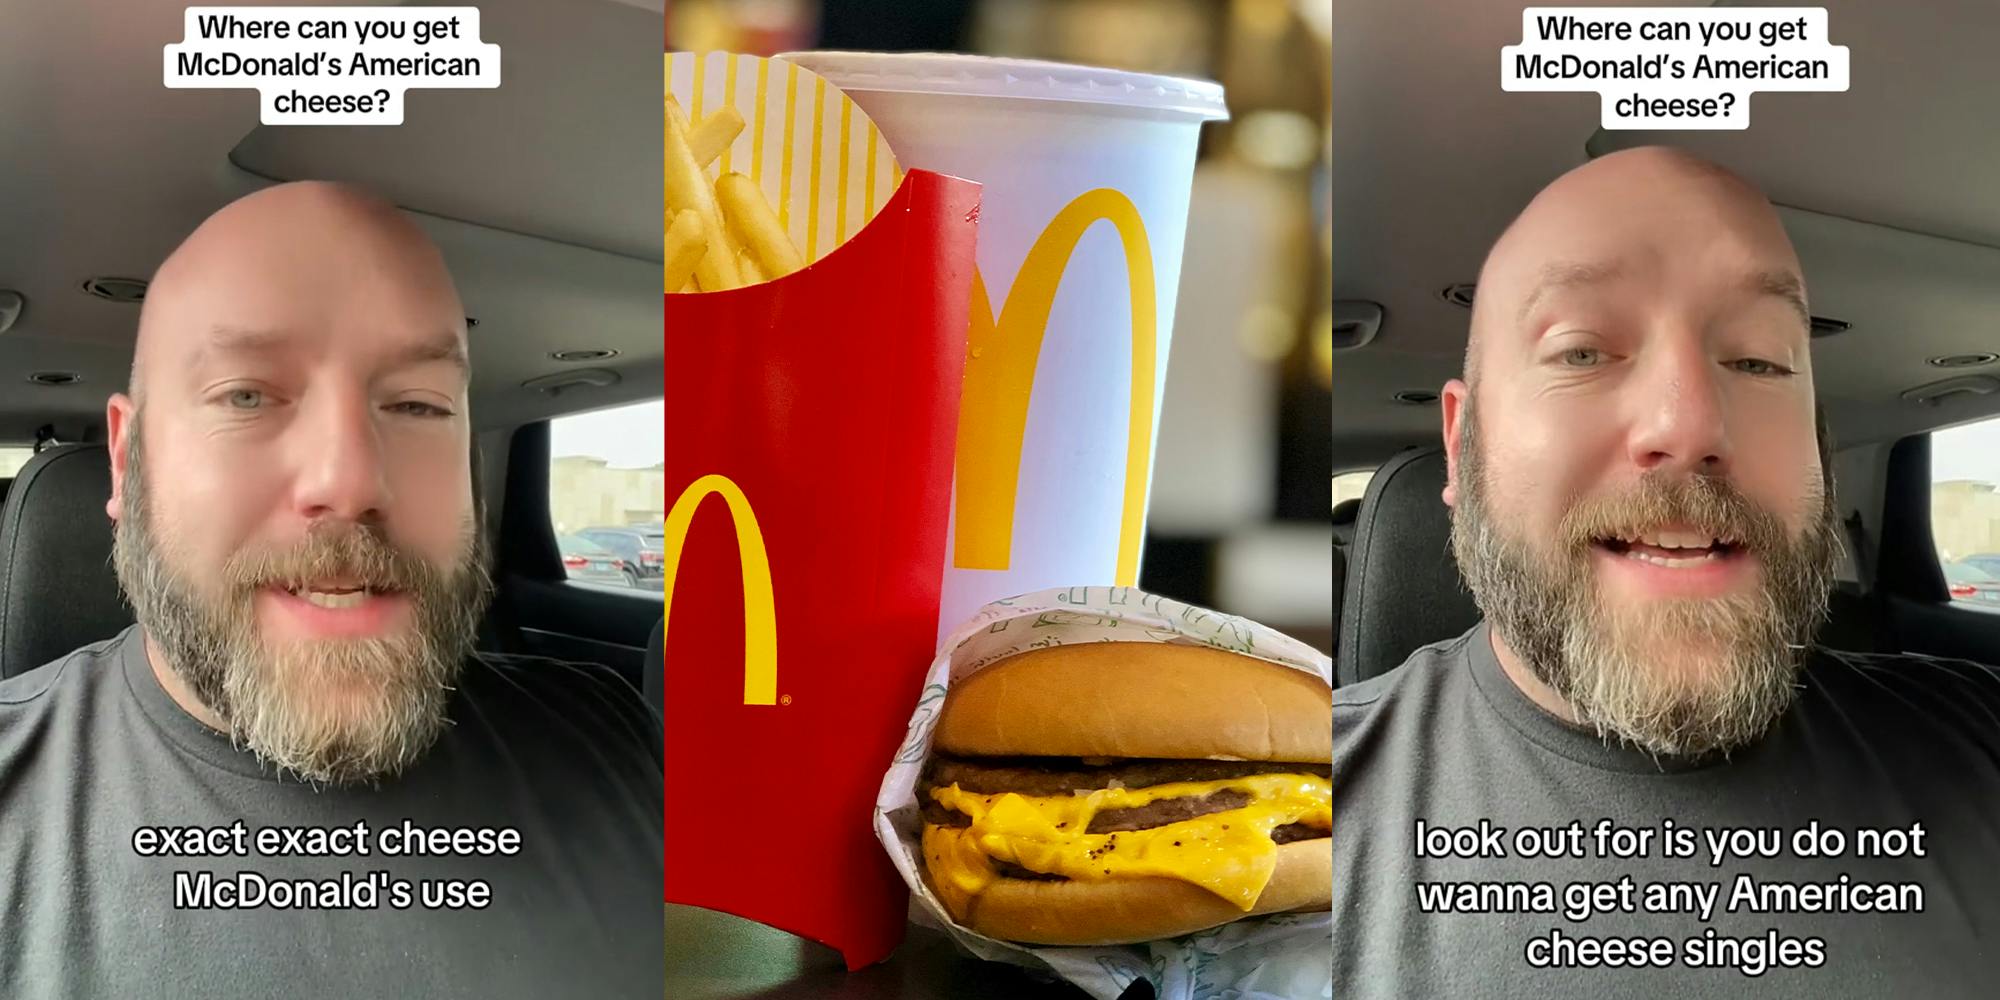 Former McDonald's corporate chef says Great Value cheese tastes identical to McDonald's cheese